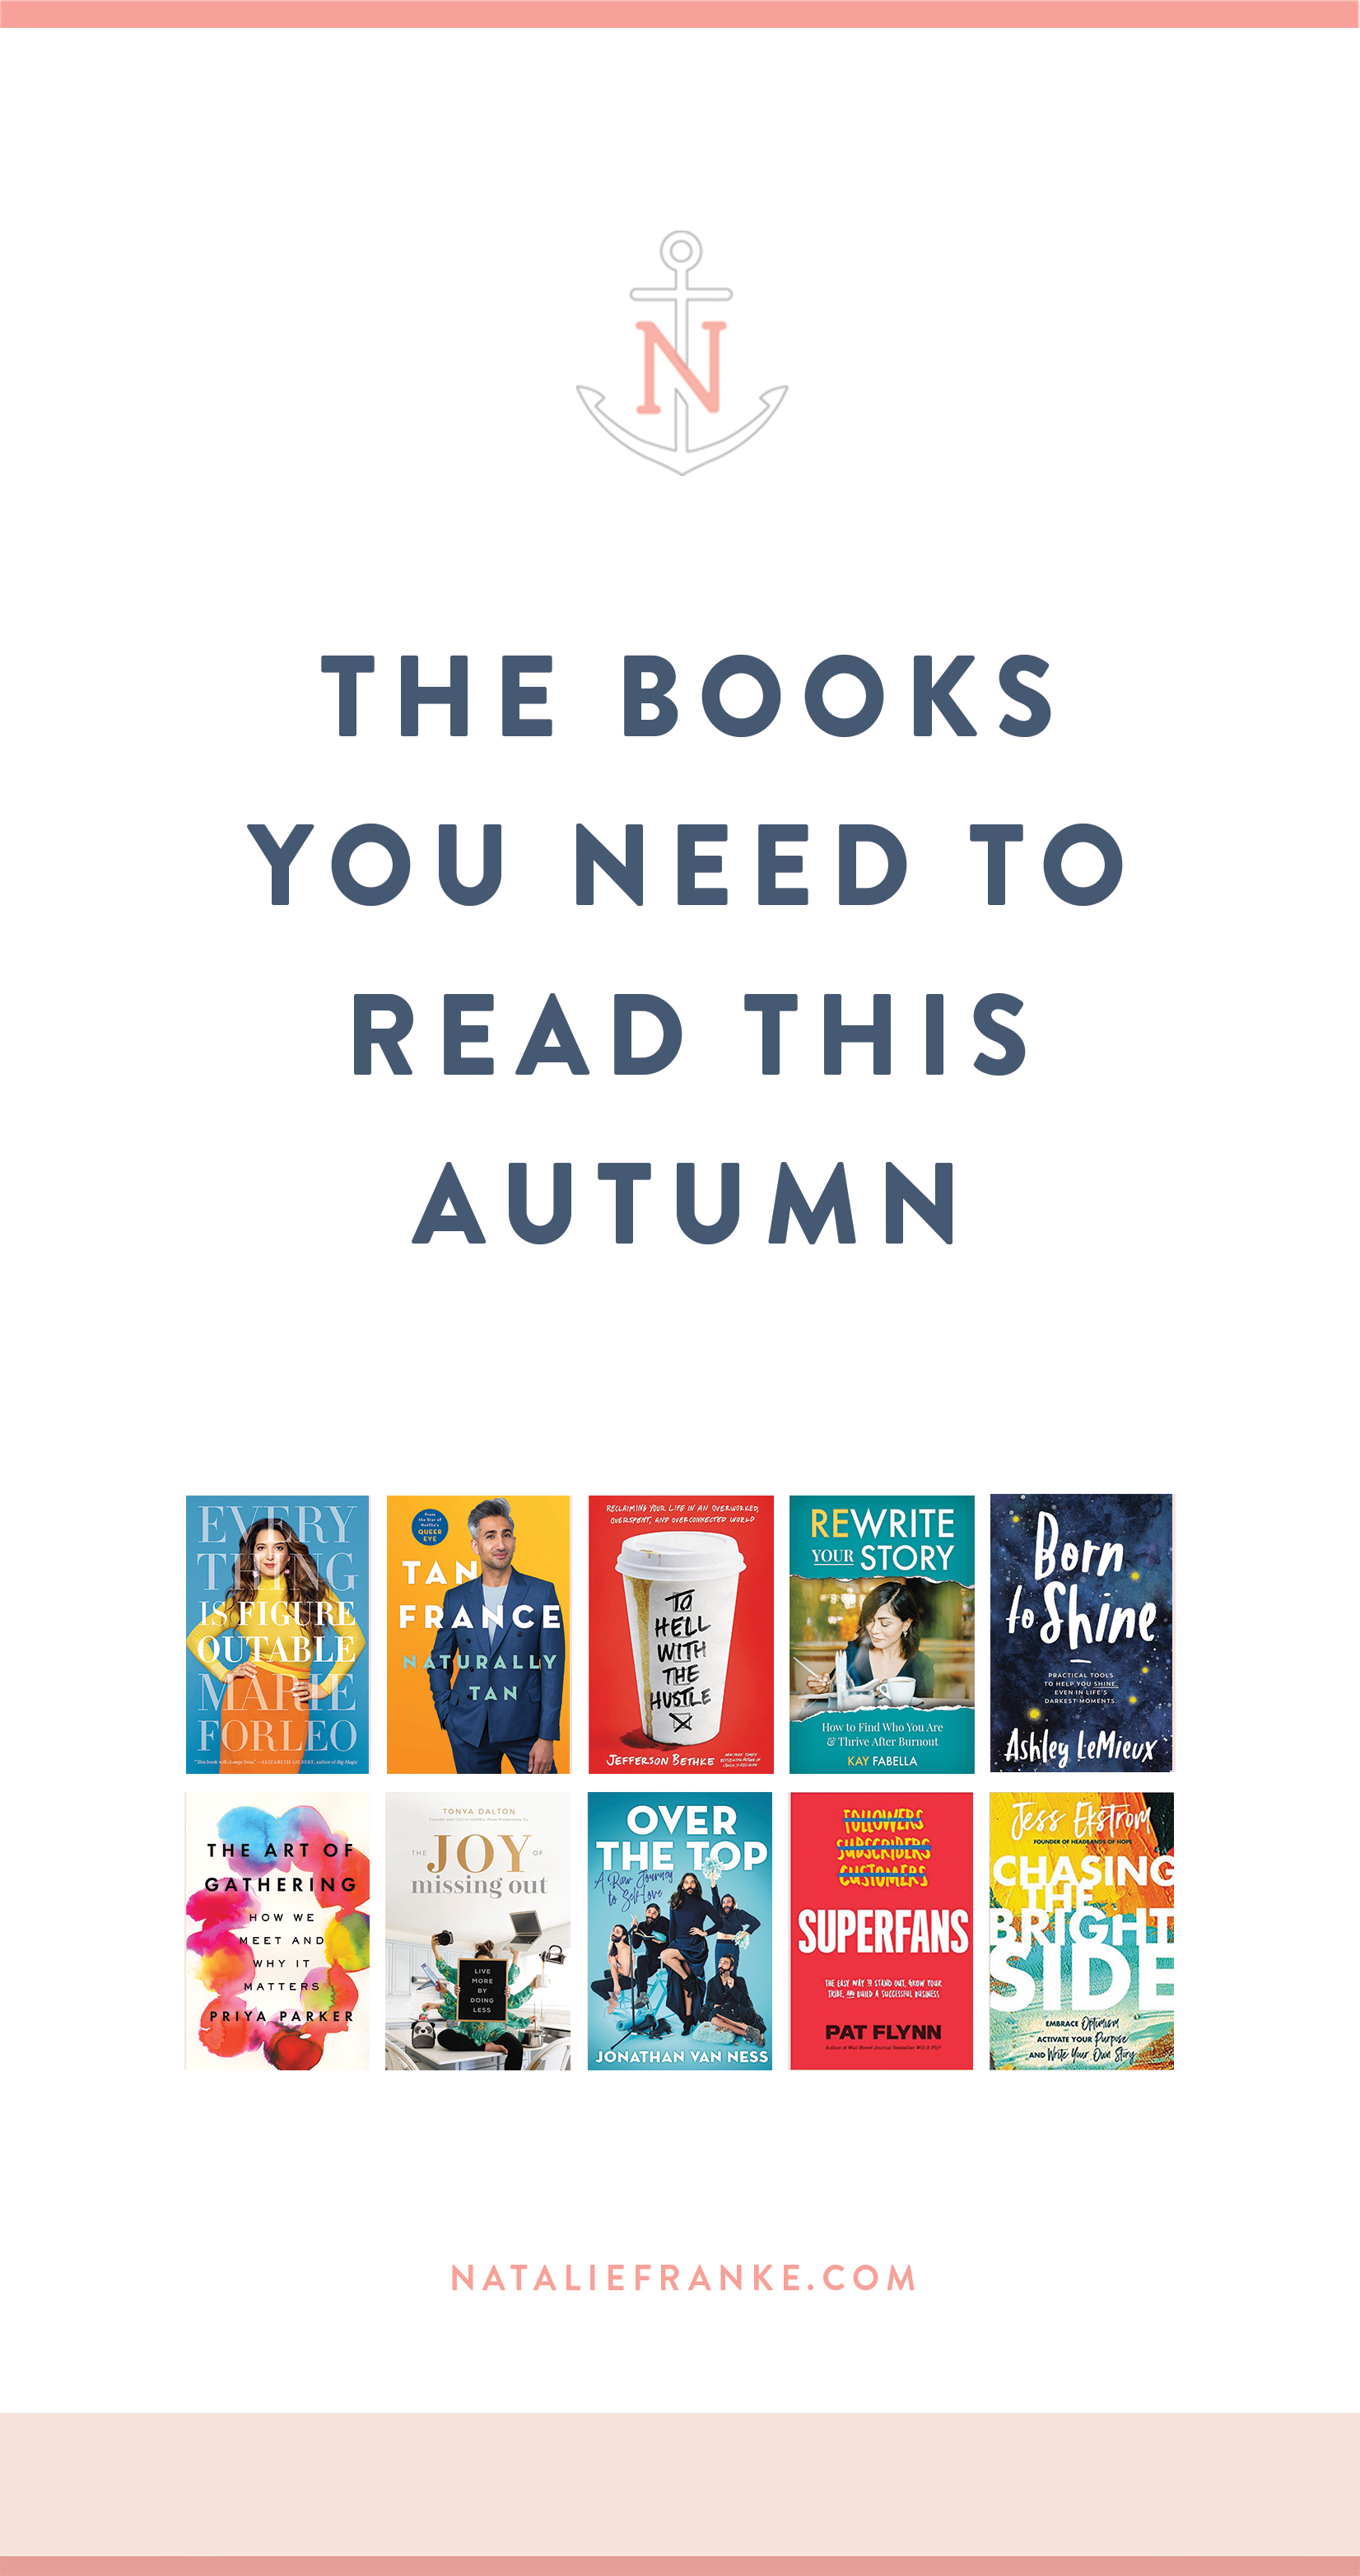 Autumn Reading List 2019 for Entrepreneurs, Bloggers, and Small Business Owners by Natalie Franke